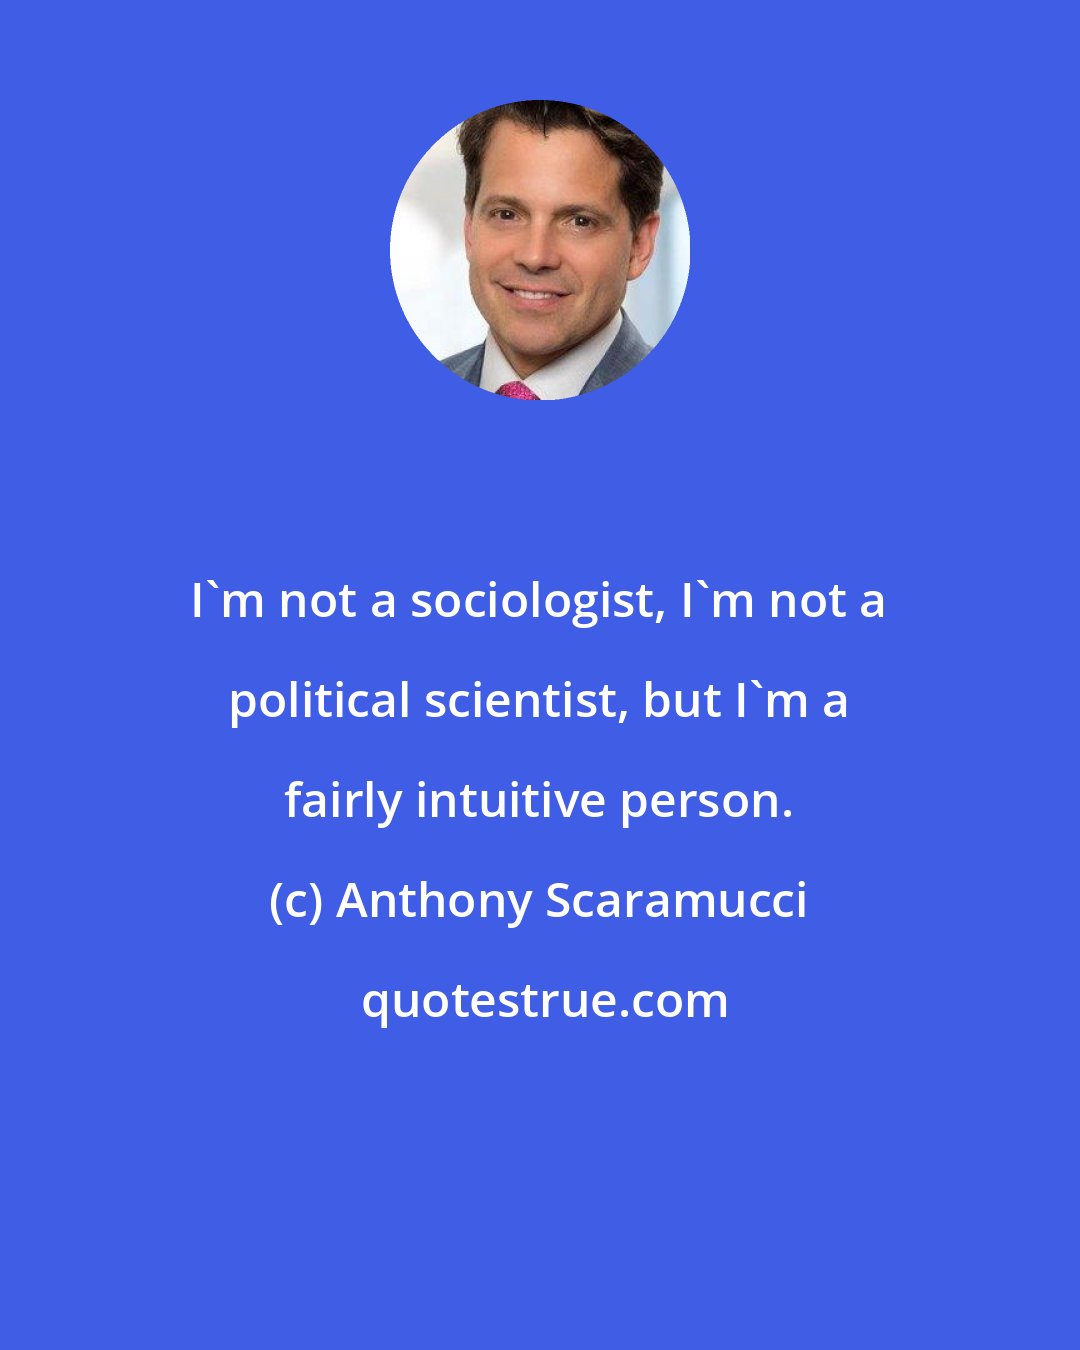 Anthony Scaramucci: I'm not a sociologist, I'm not a political scientist, but I'm a fairly intuitive person.